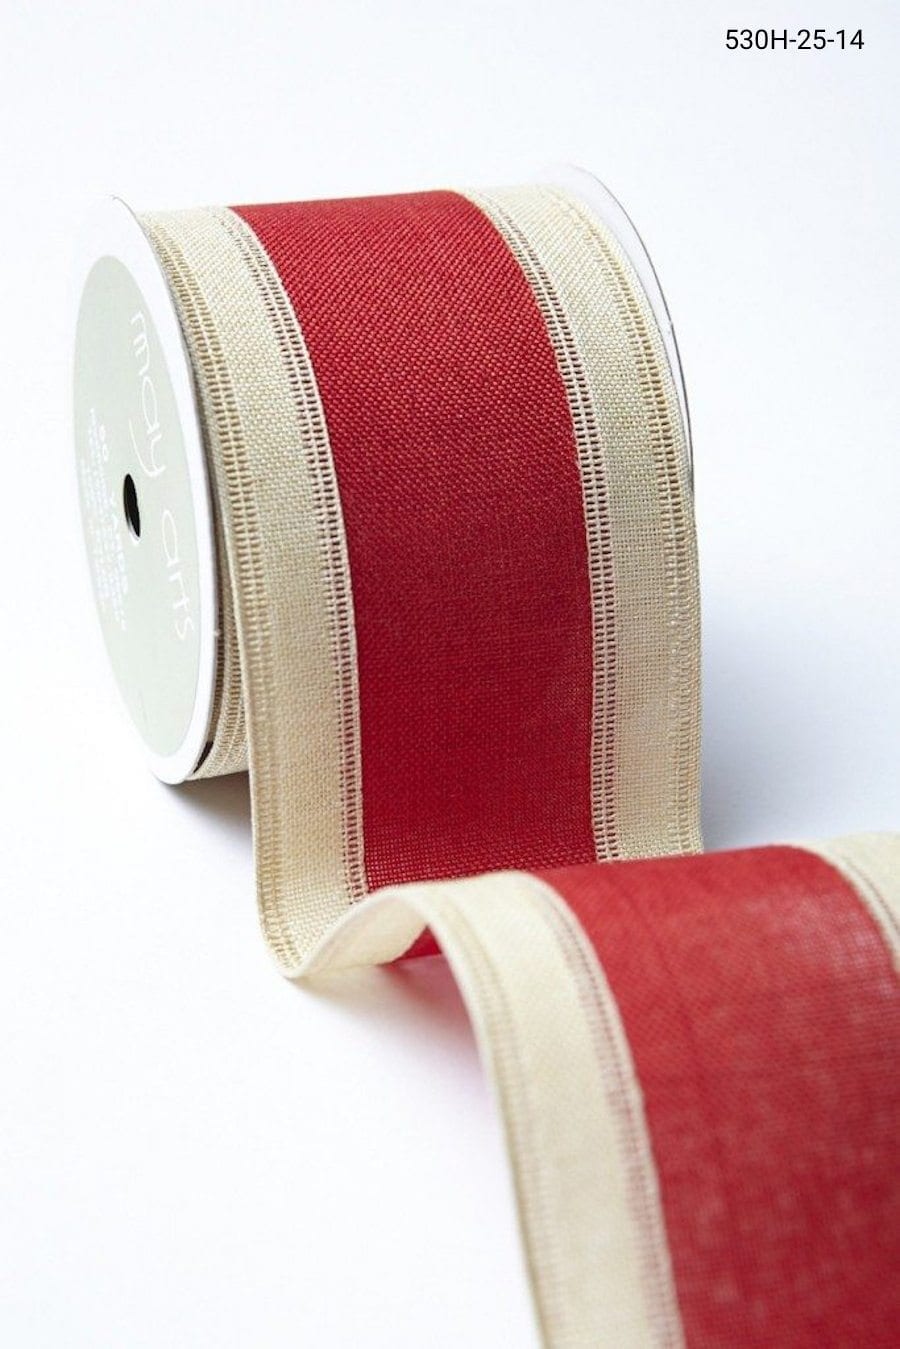 2.5” 530H-25-14 RED/IVORY CENTER BAND